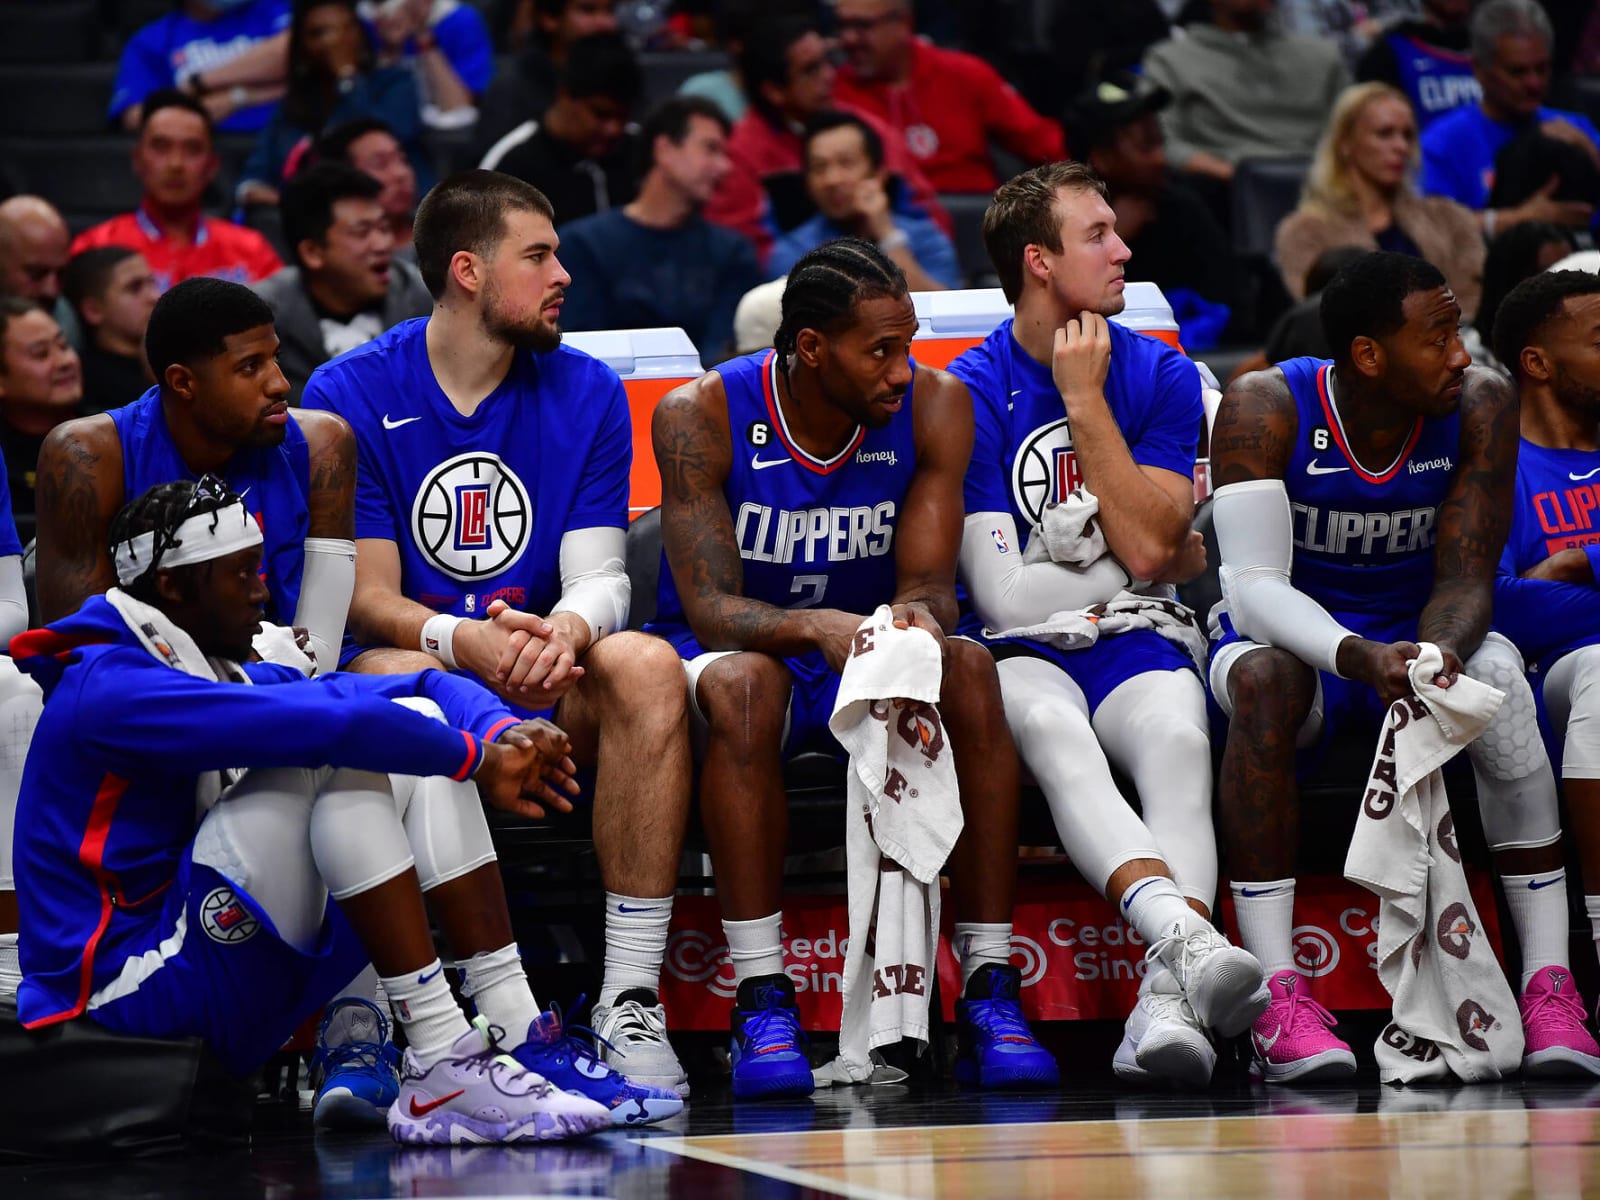 Clippers debut streaming service, but is ClipperVision worth $199 per year? Yardbarker